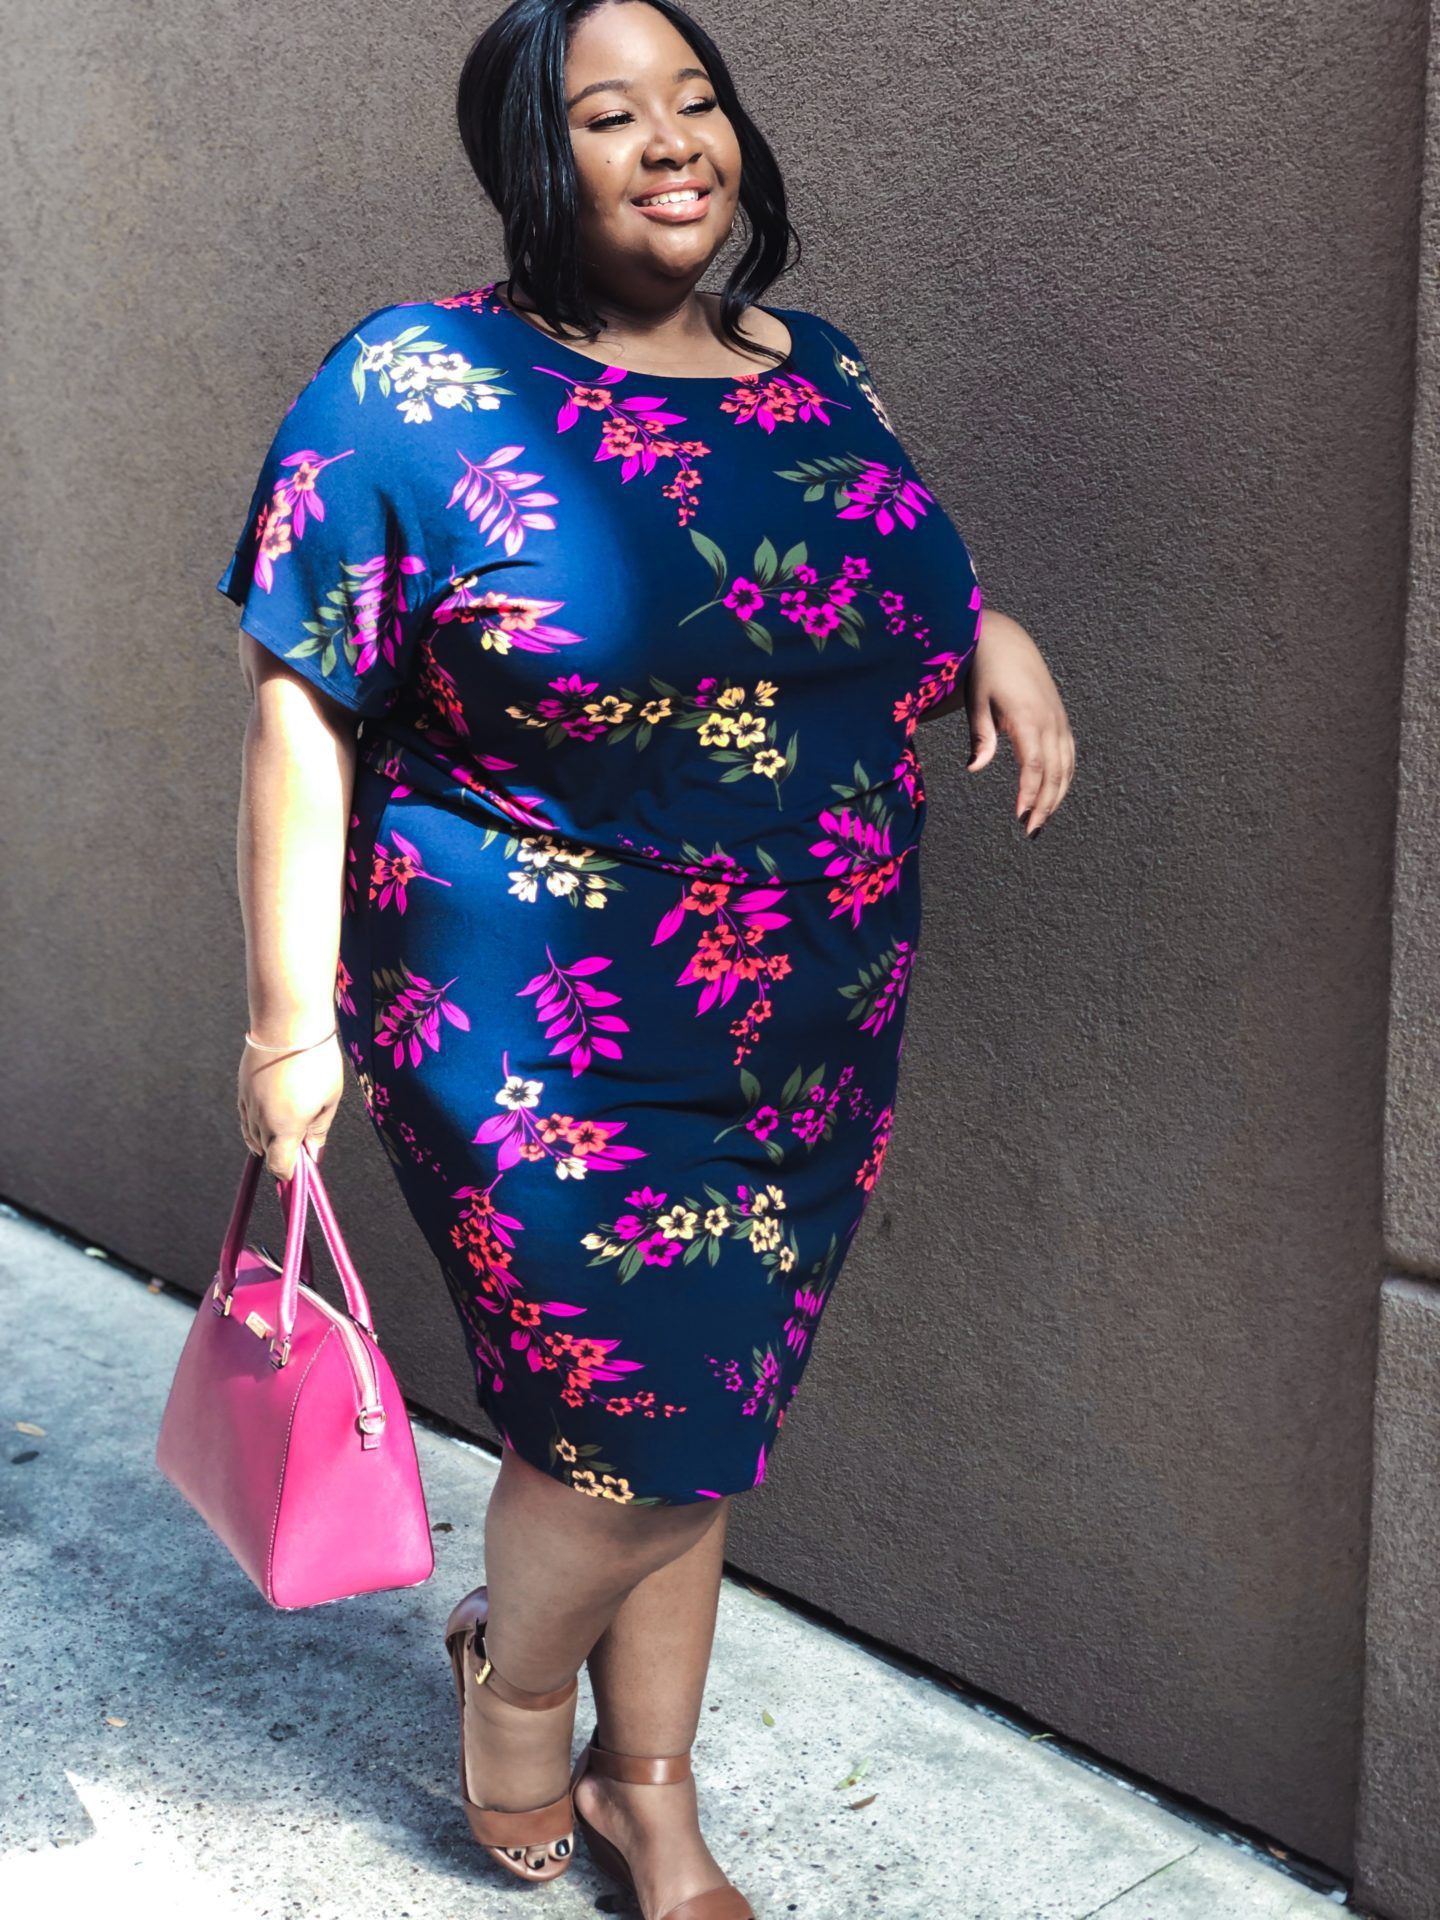 Plus size work outfit plus size clothing, cocktail dress: Cocktail Dresses,  fashion model,  Magenta And Purple Outfit  